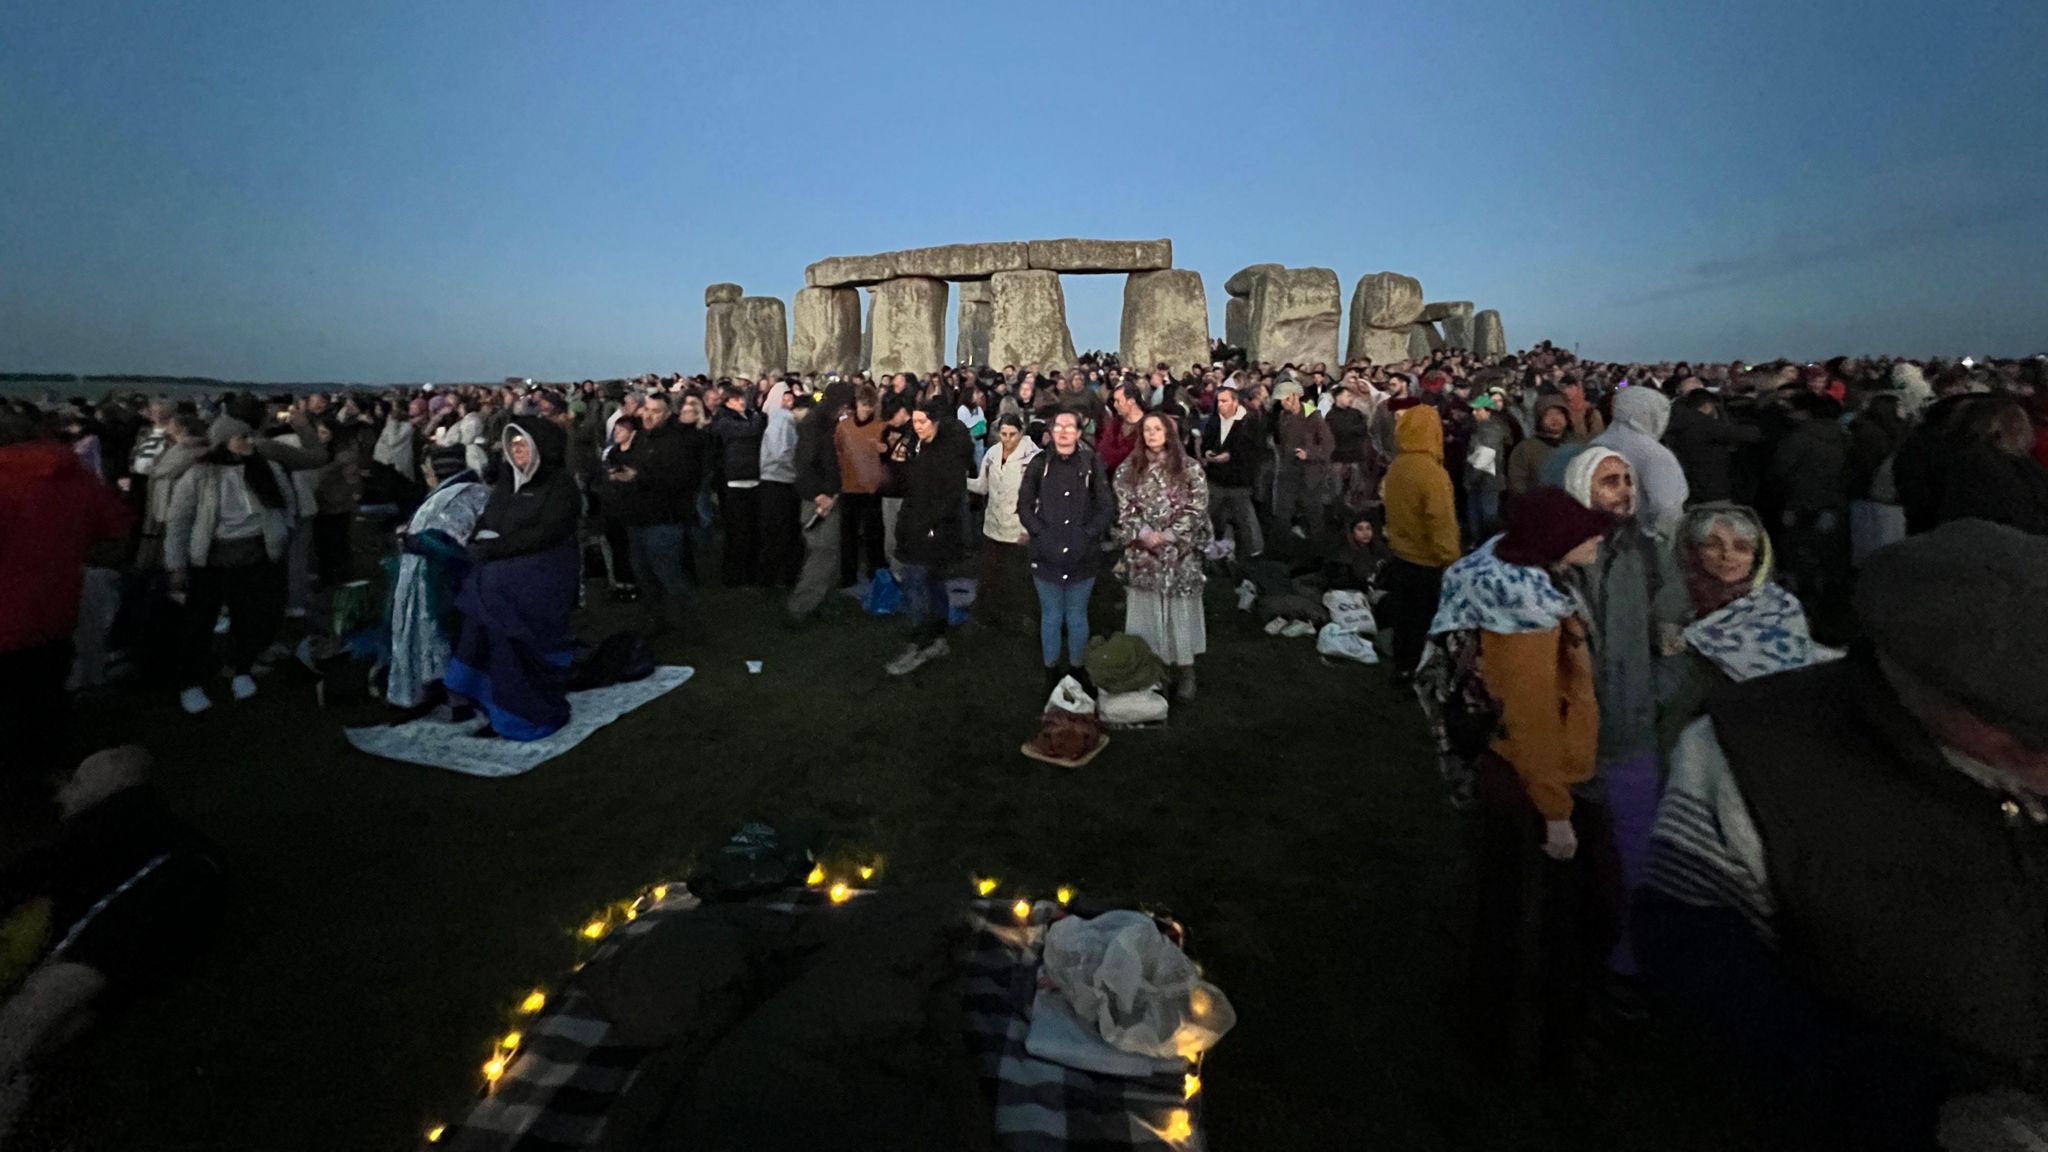 A darkened sky and people waiting for the sunrise in front of Stonehenge